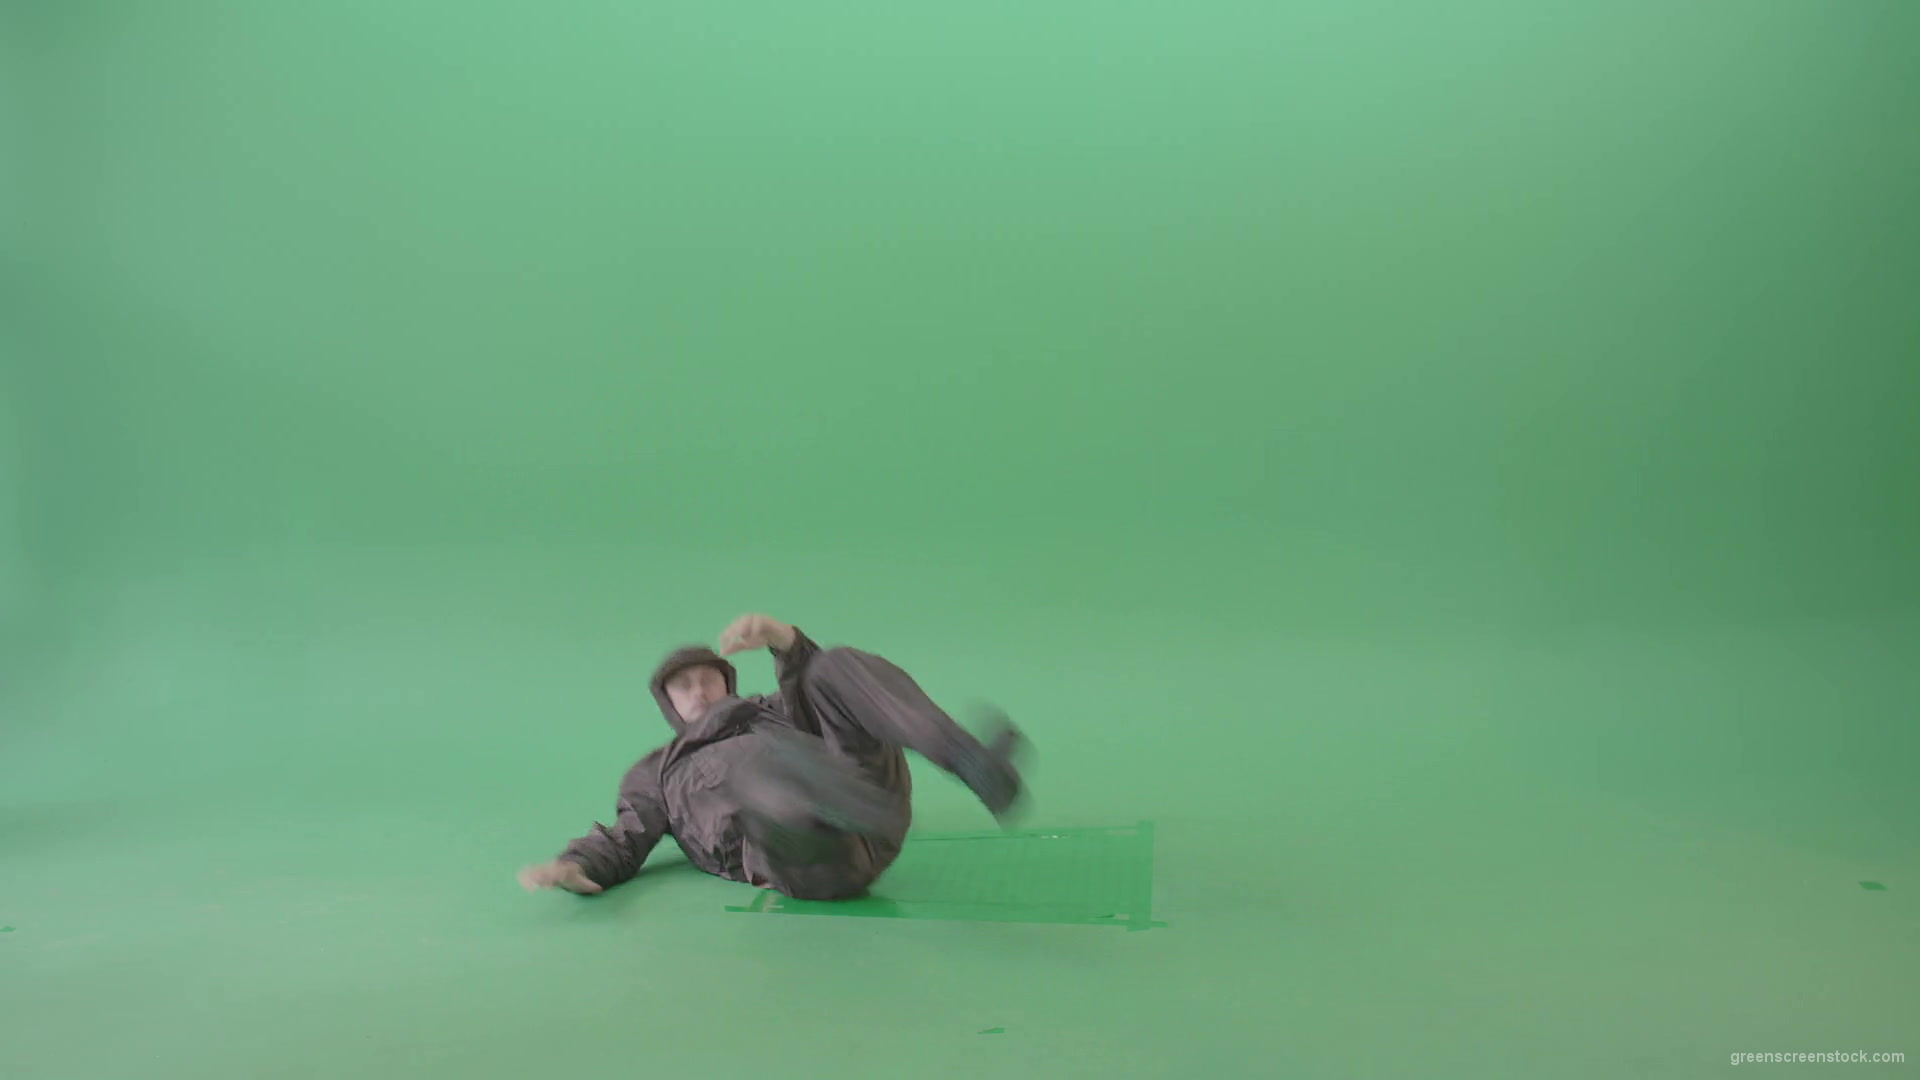 Hip-Hop-Dance-making-power-move-with-freeze-dancing-breakdance-on-green-screen-4K-Video-Footage-1920_009 Green Screen Stock